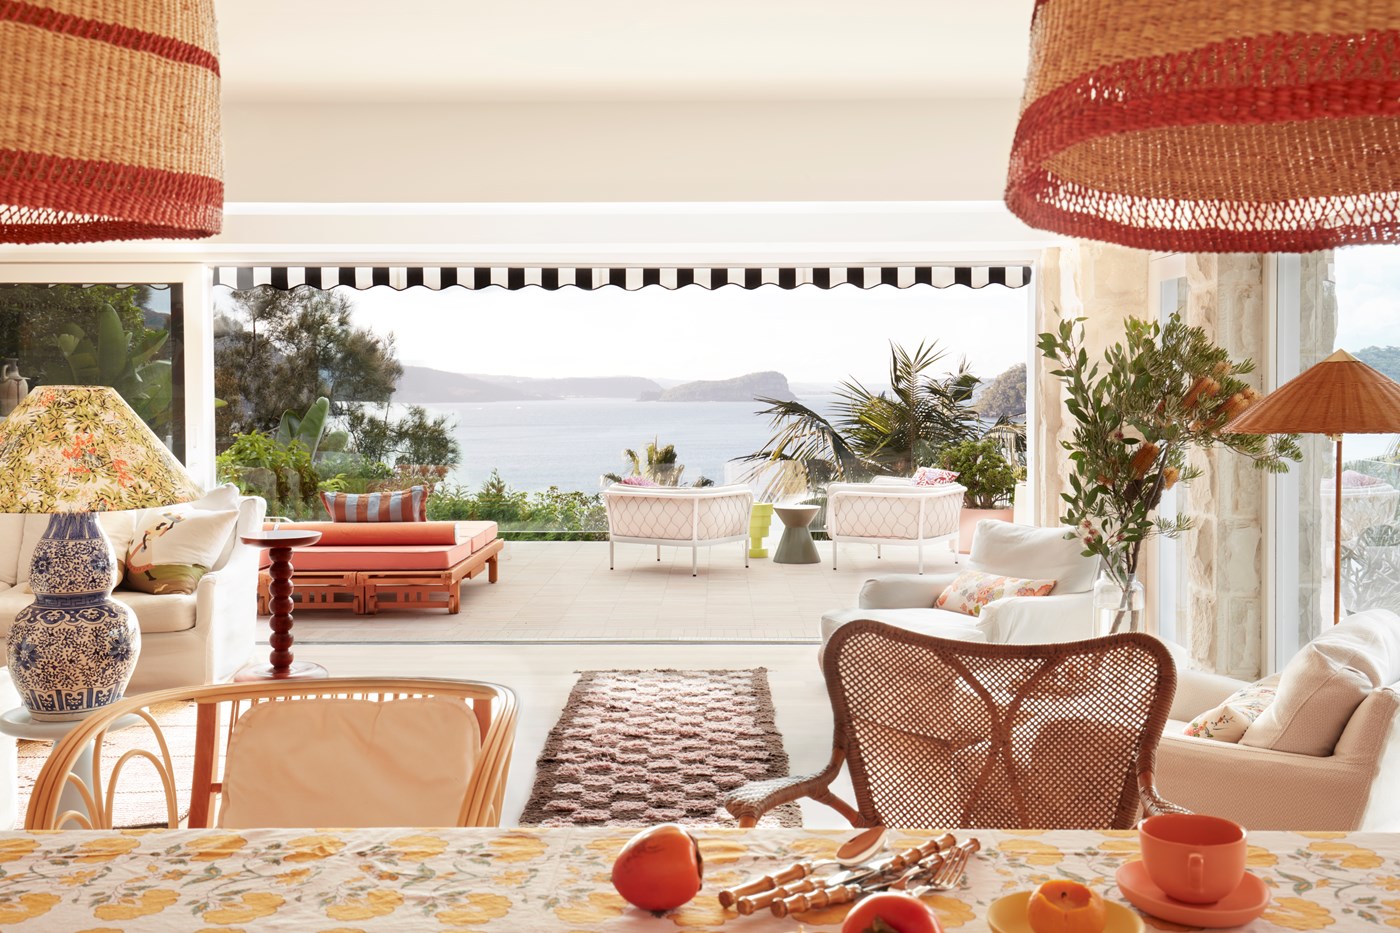 The bright and vibrant living room of La Palma, looking out onto the ocean. 